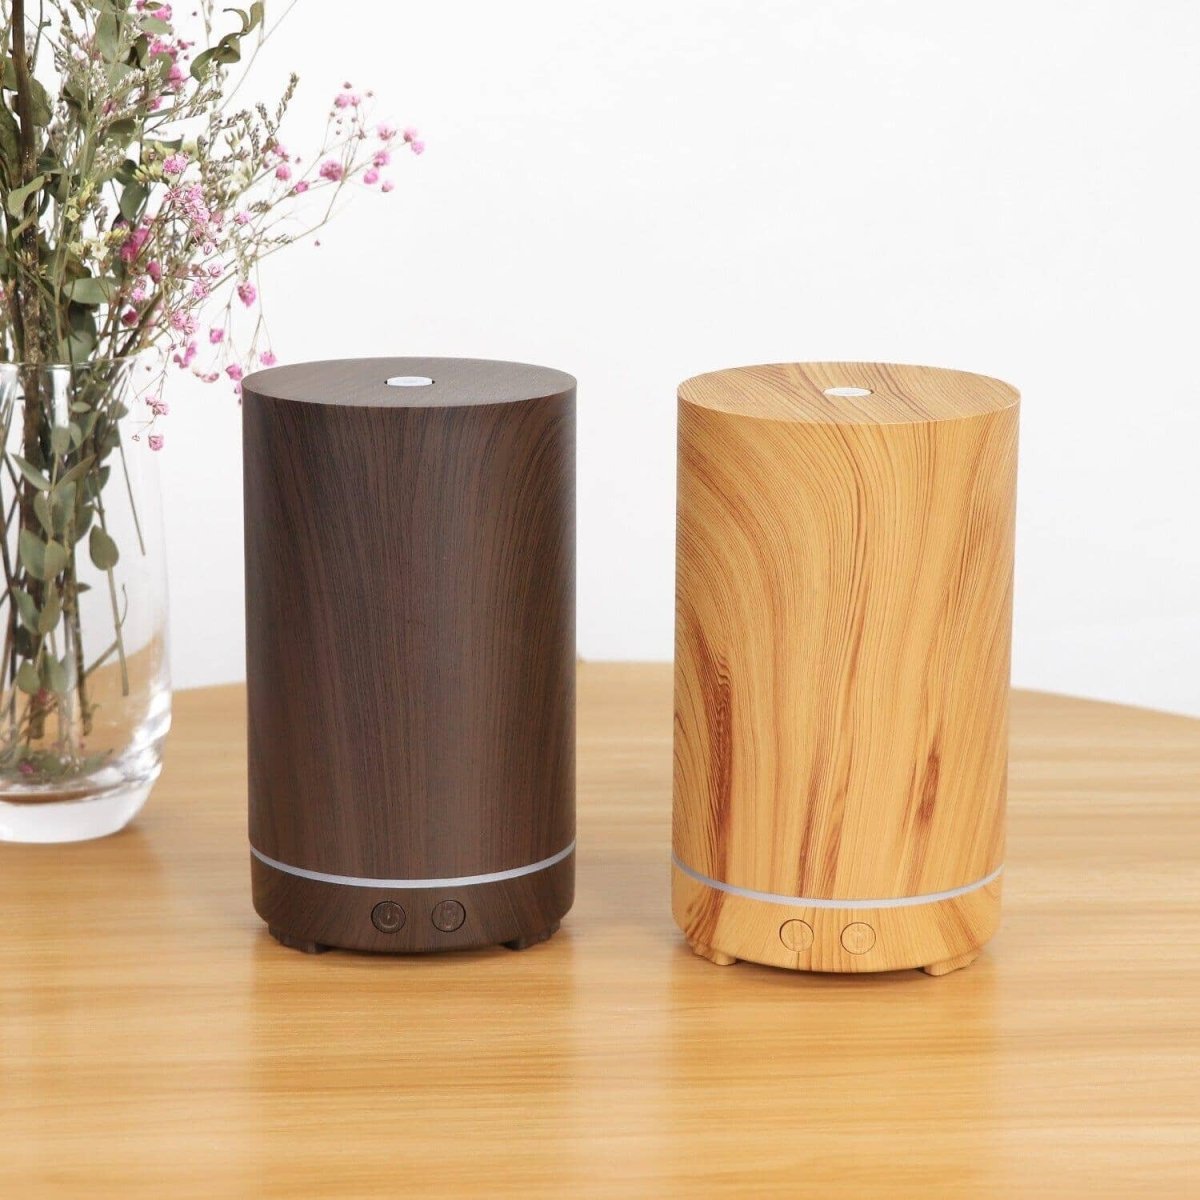 two eco-friendly-wood humidifiers on a wooden table